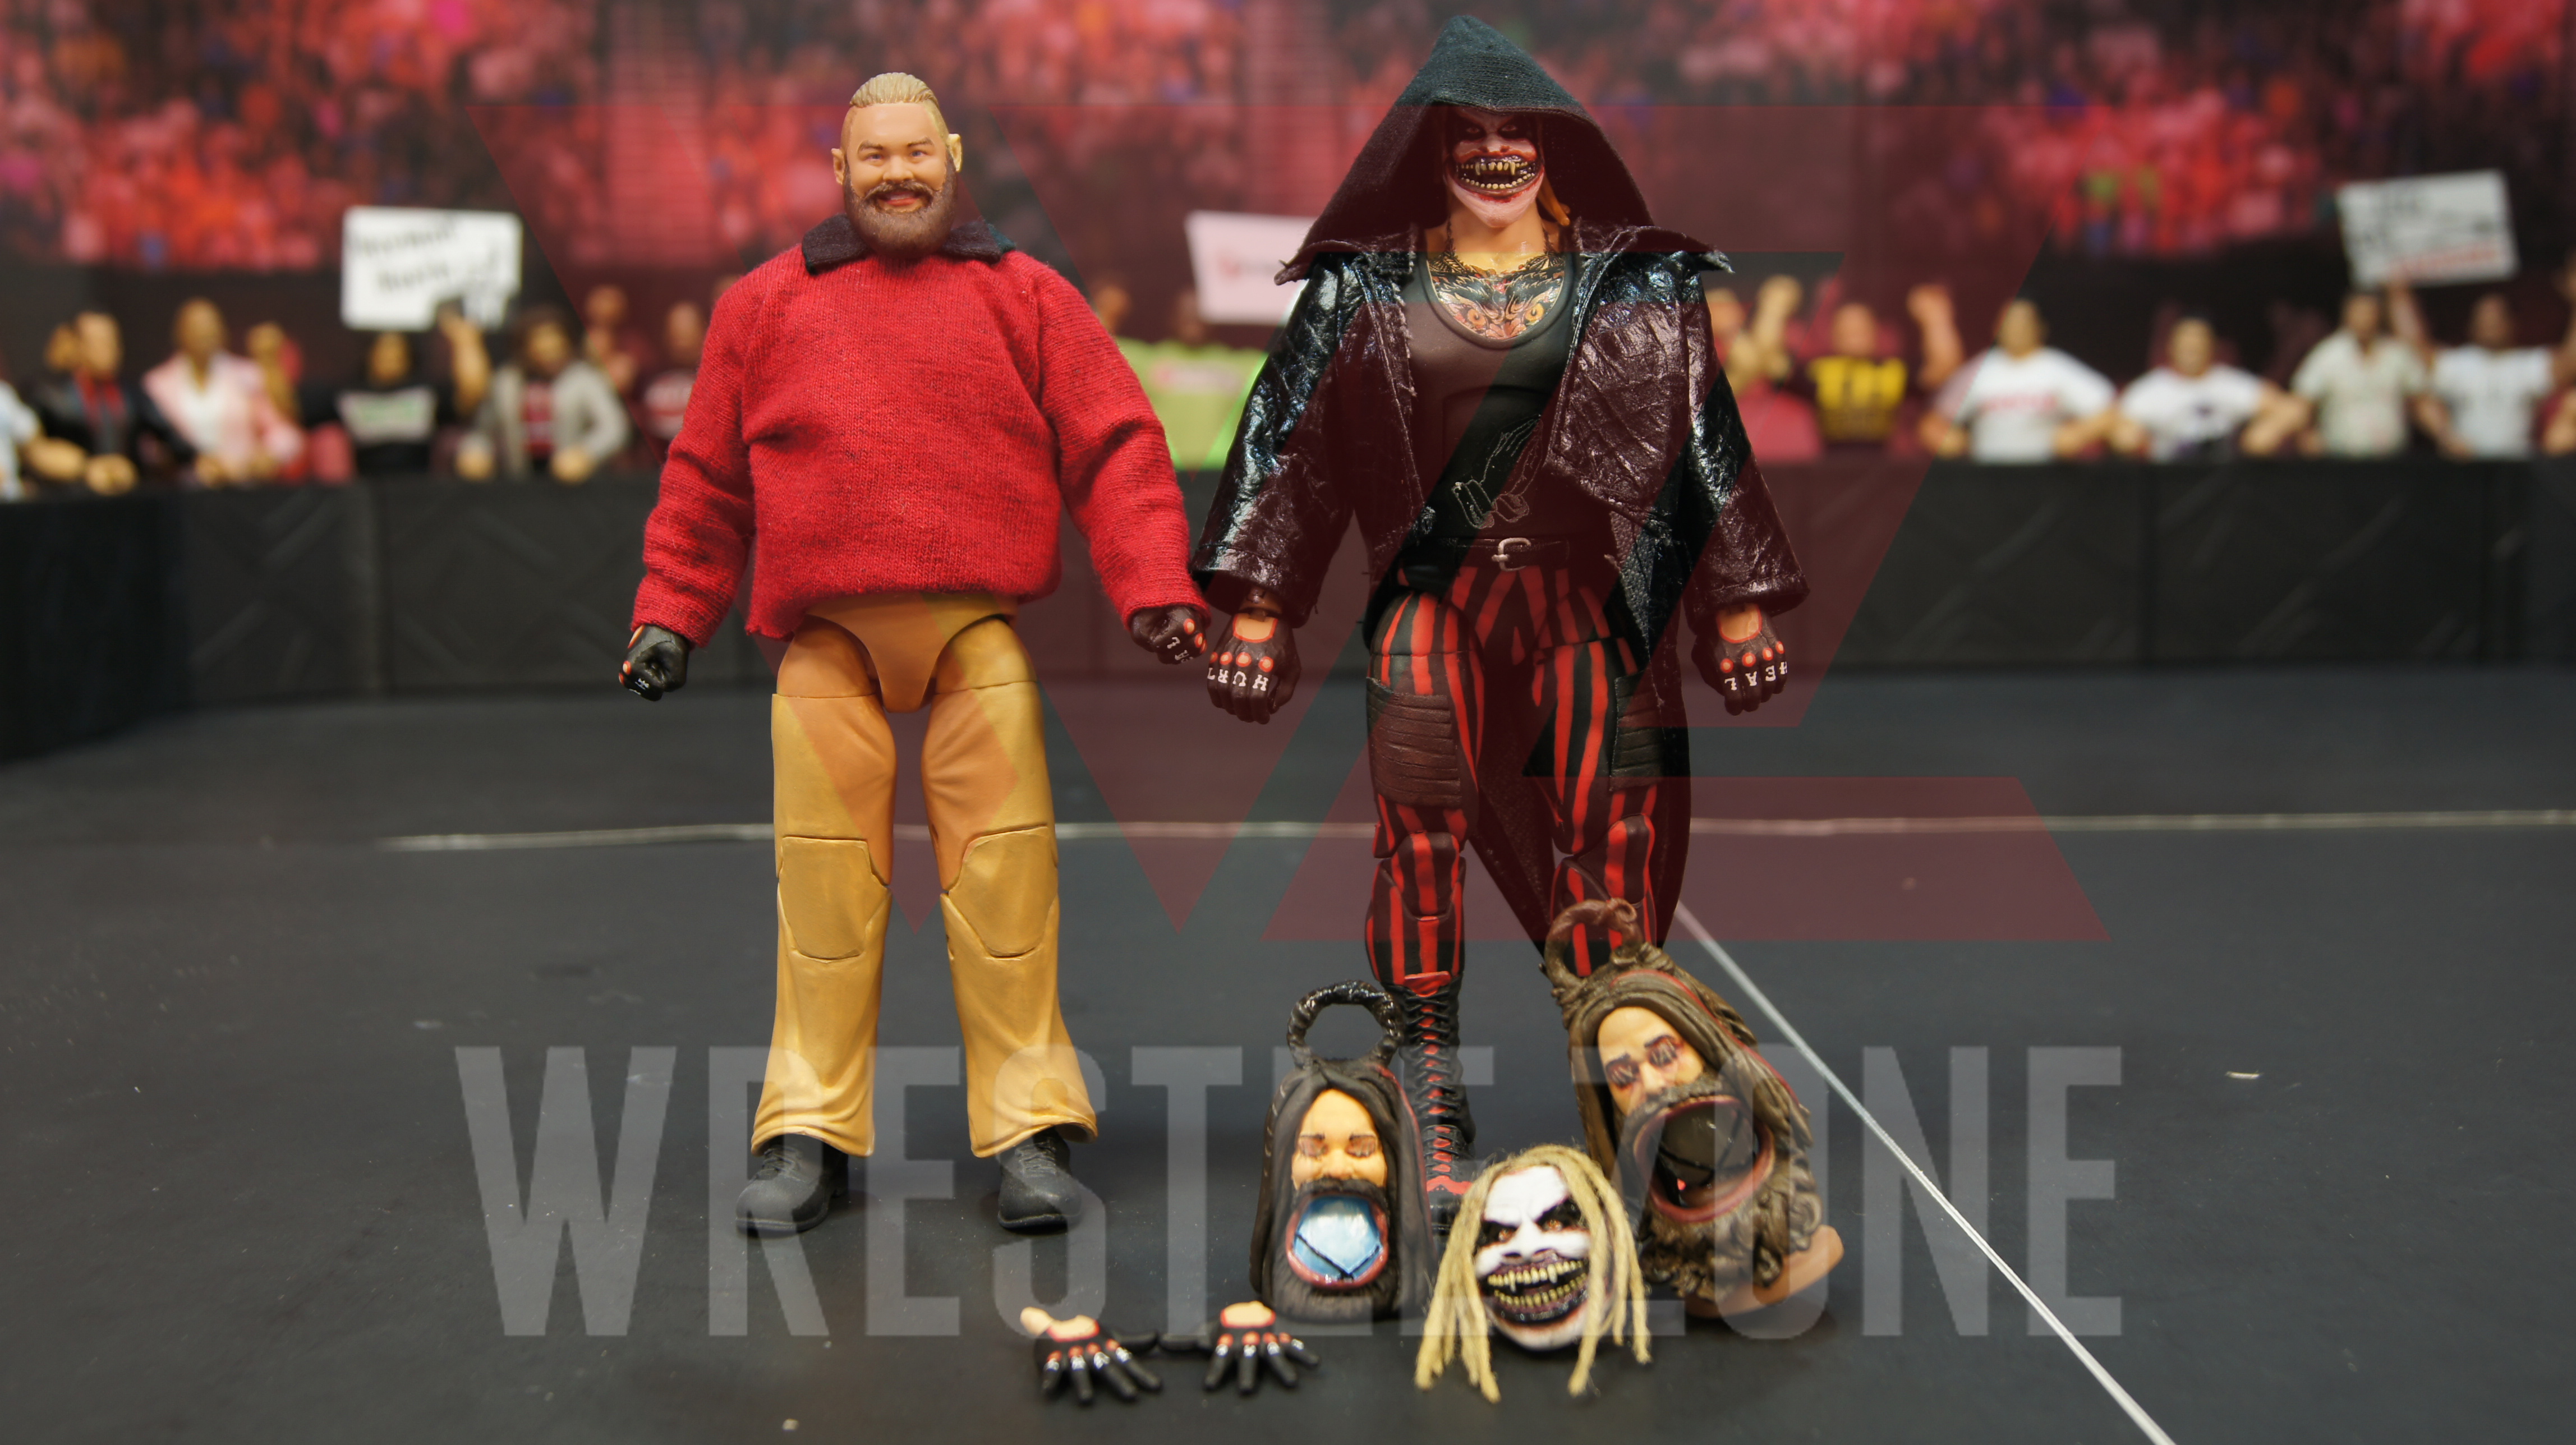 the fiend action figure wwe